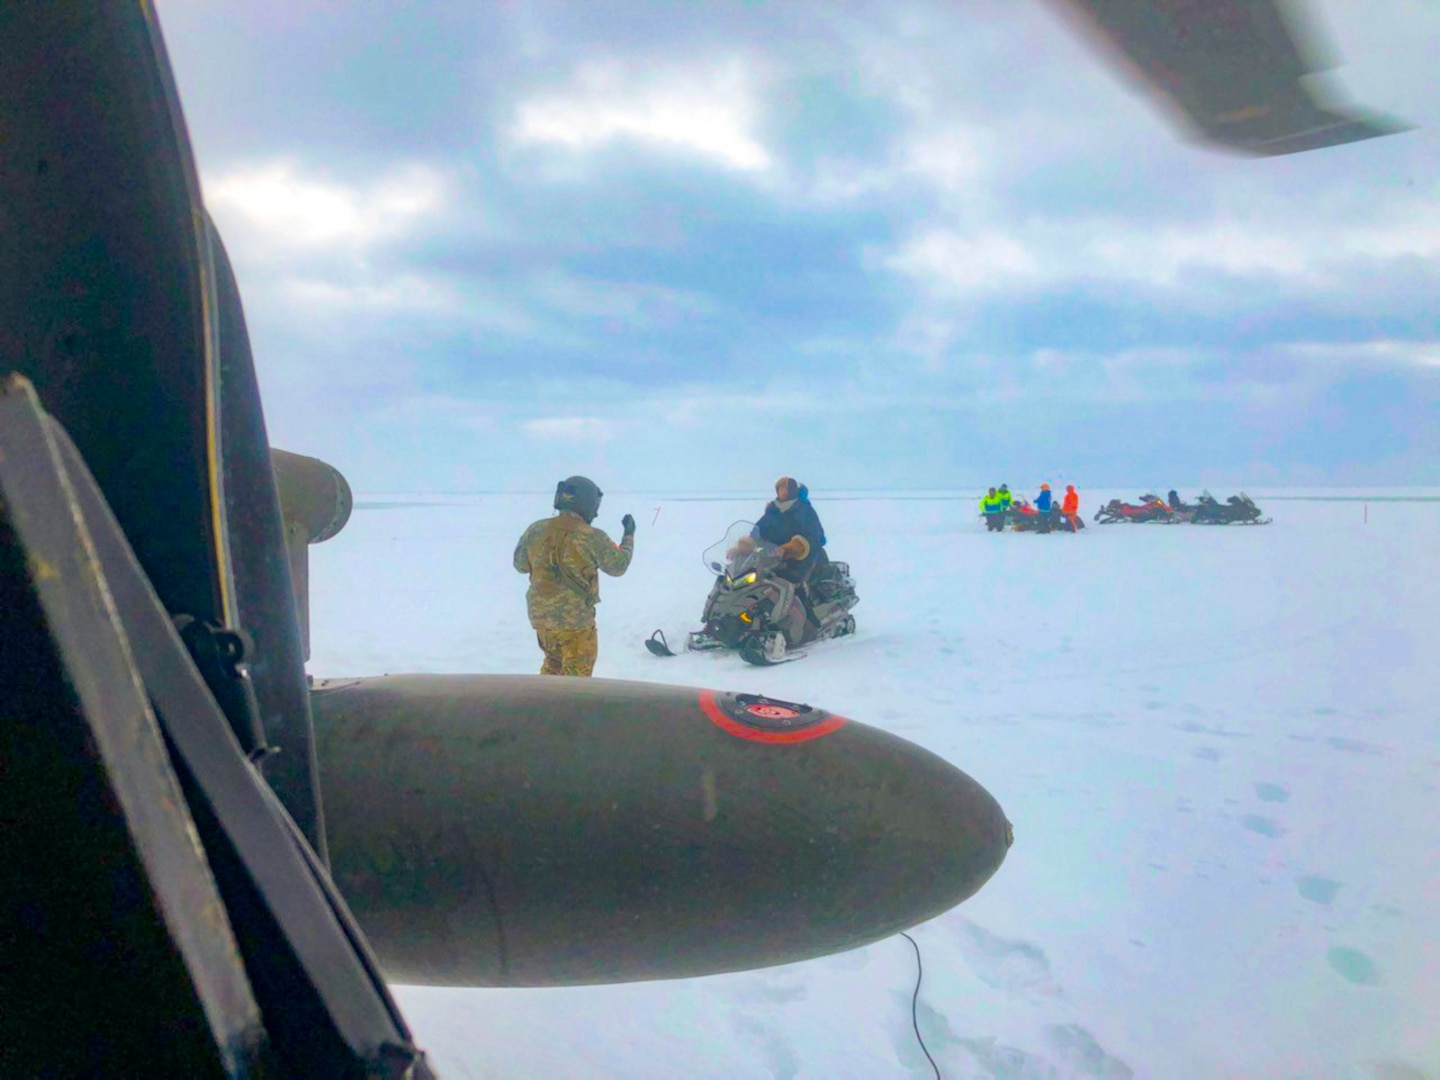 An Alaska Army National Guard UH-60 Black Hawk helicopter aircrew performed a search-and-rescue mission for three Iditarod mushers about 25 miles east of Nome, March 20, 2020. The mushers and their dogs went through Bering Sea floodwaters on the race trail and were wet and freezing. The mushers were flown to Nome and transported to a hospital.